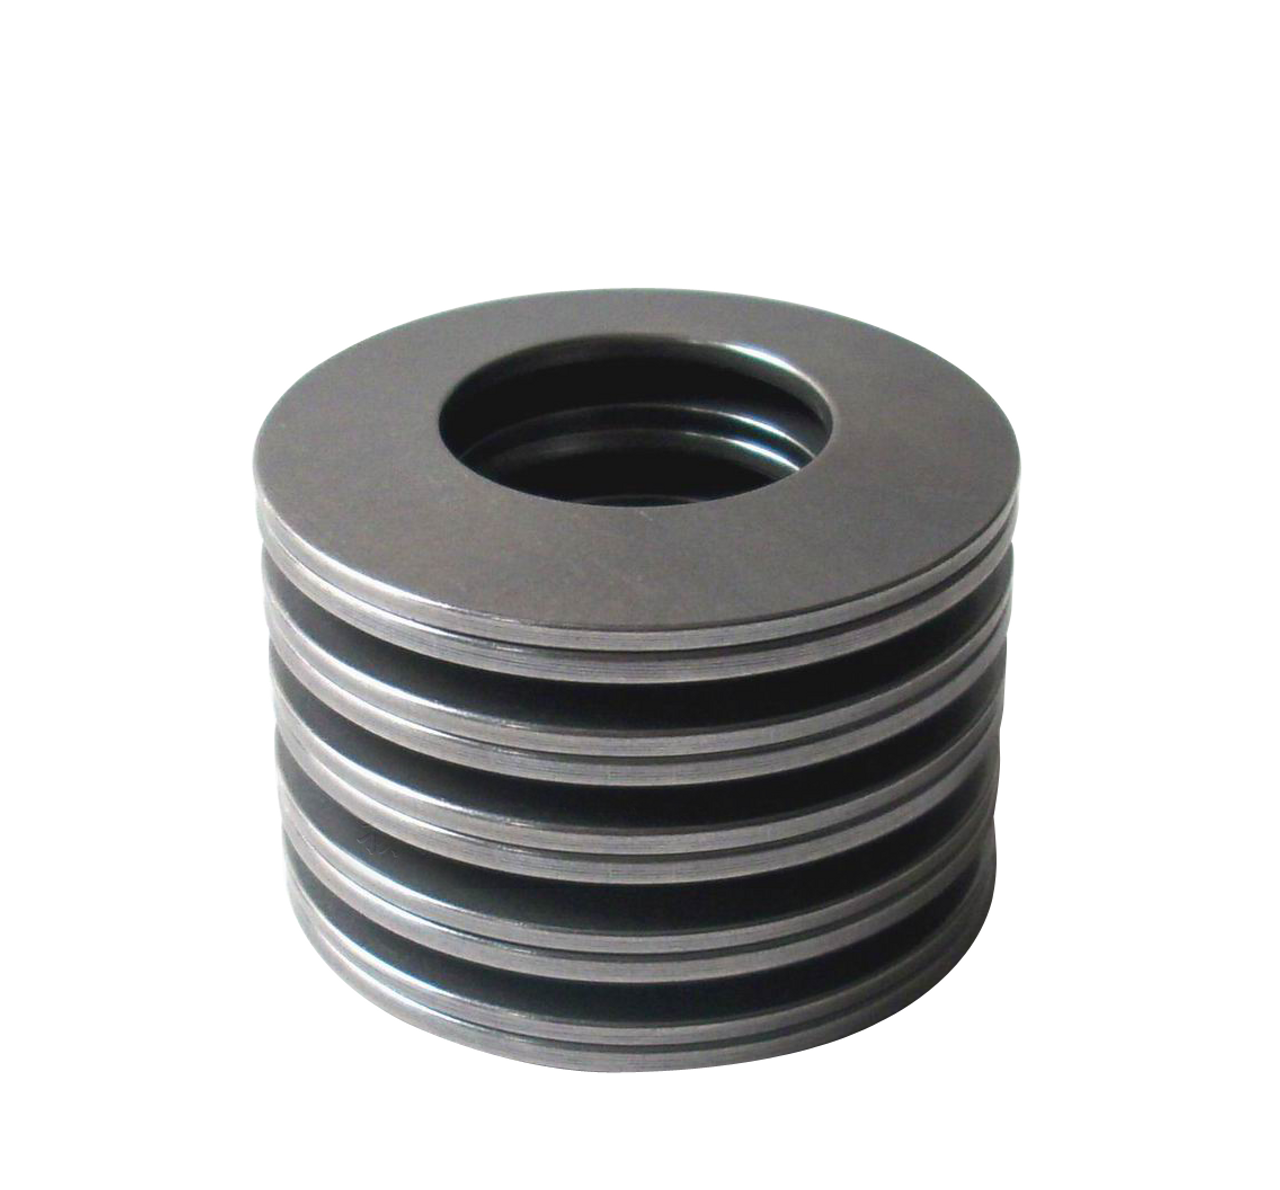 60mm Disc Spring (DIN 2093) Conical Washer  DS061.0-150-06